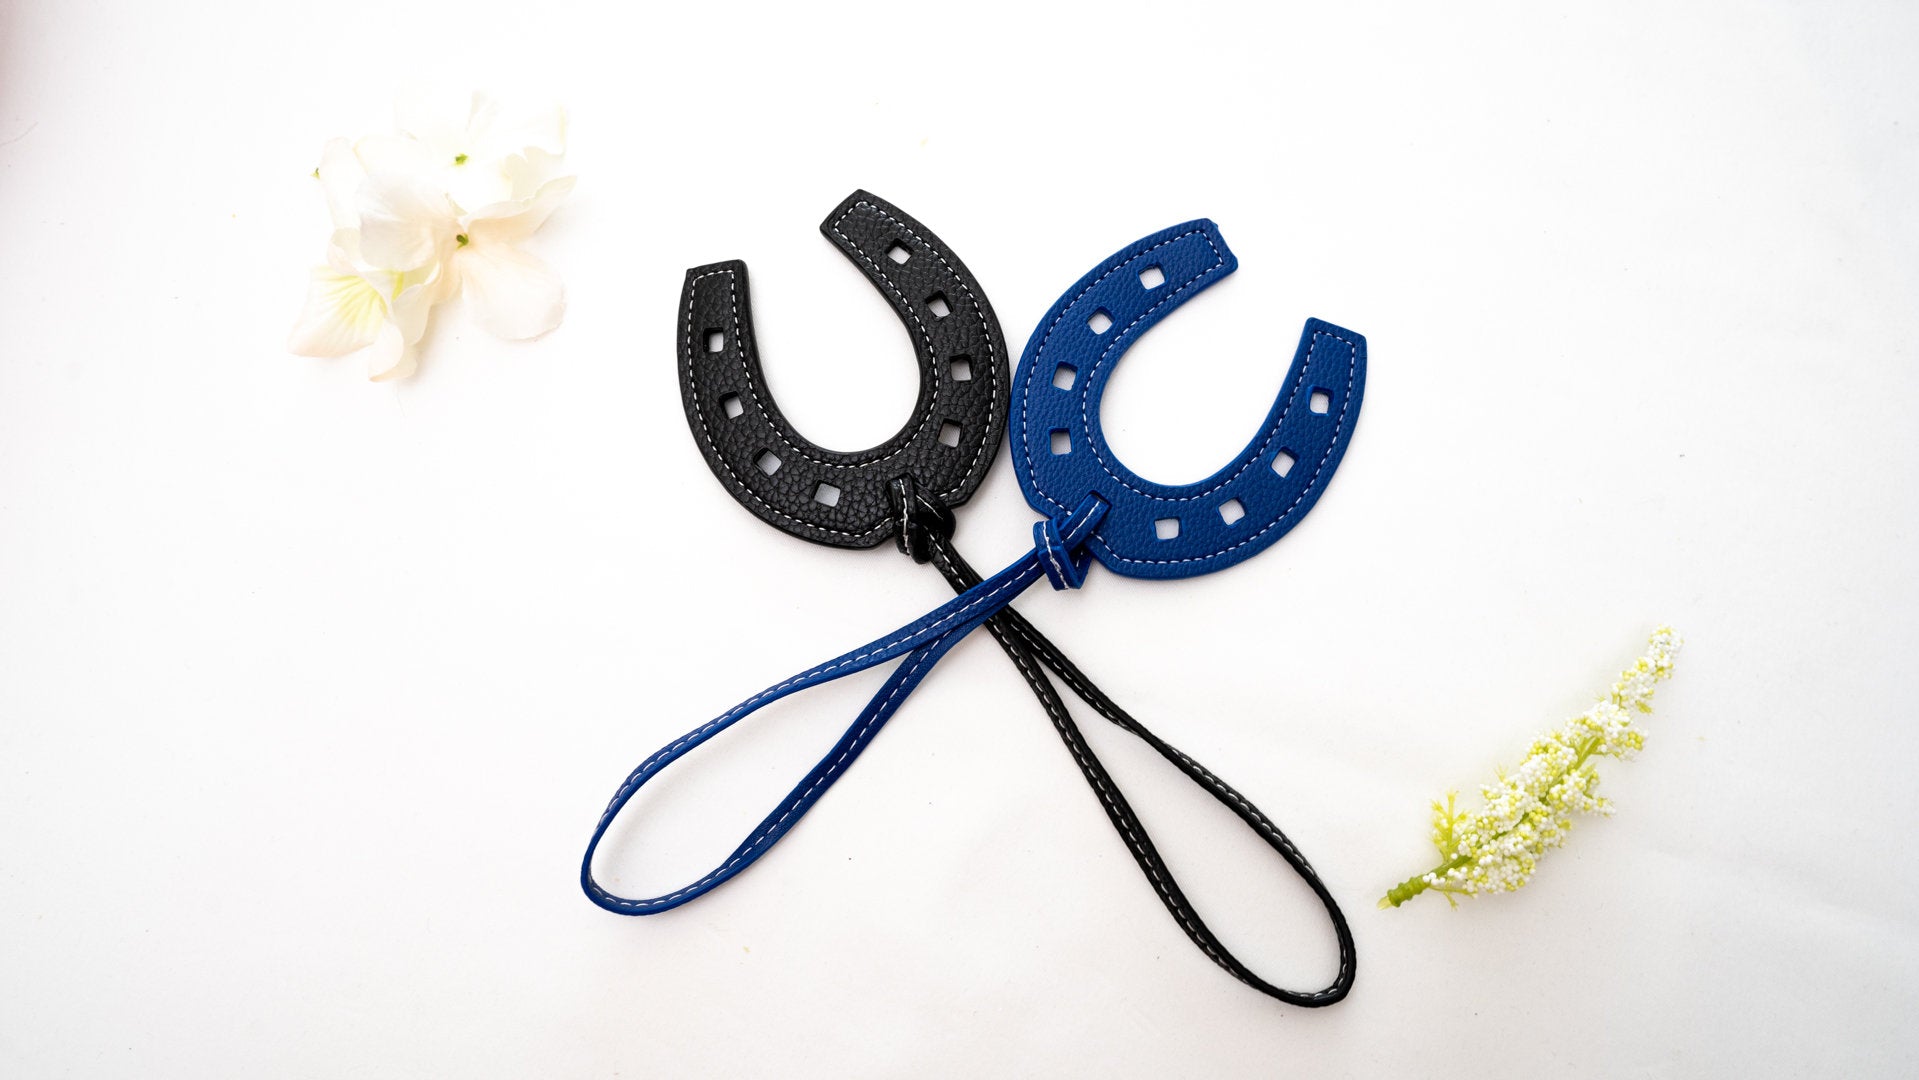 Dark Blue Star Charms | Leather Bag Charms Handmade in The USA